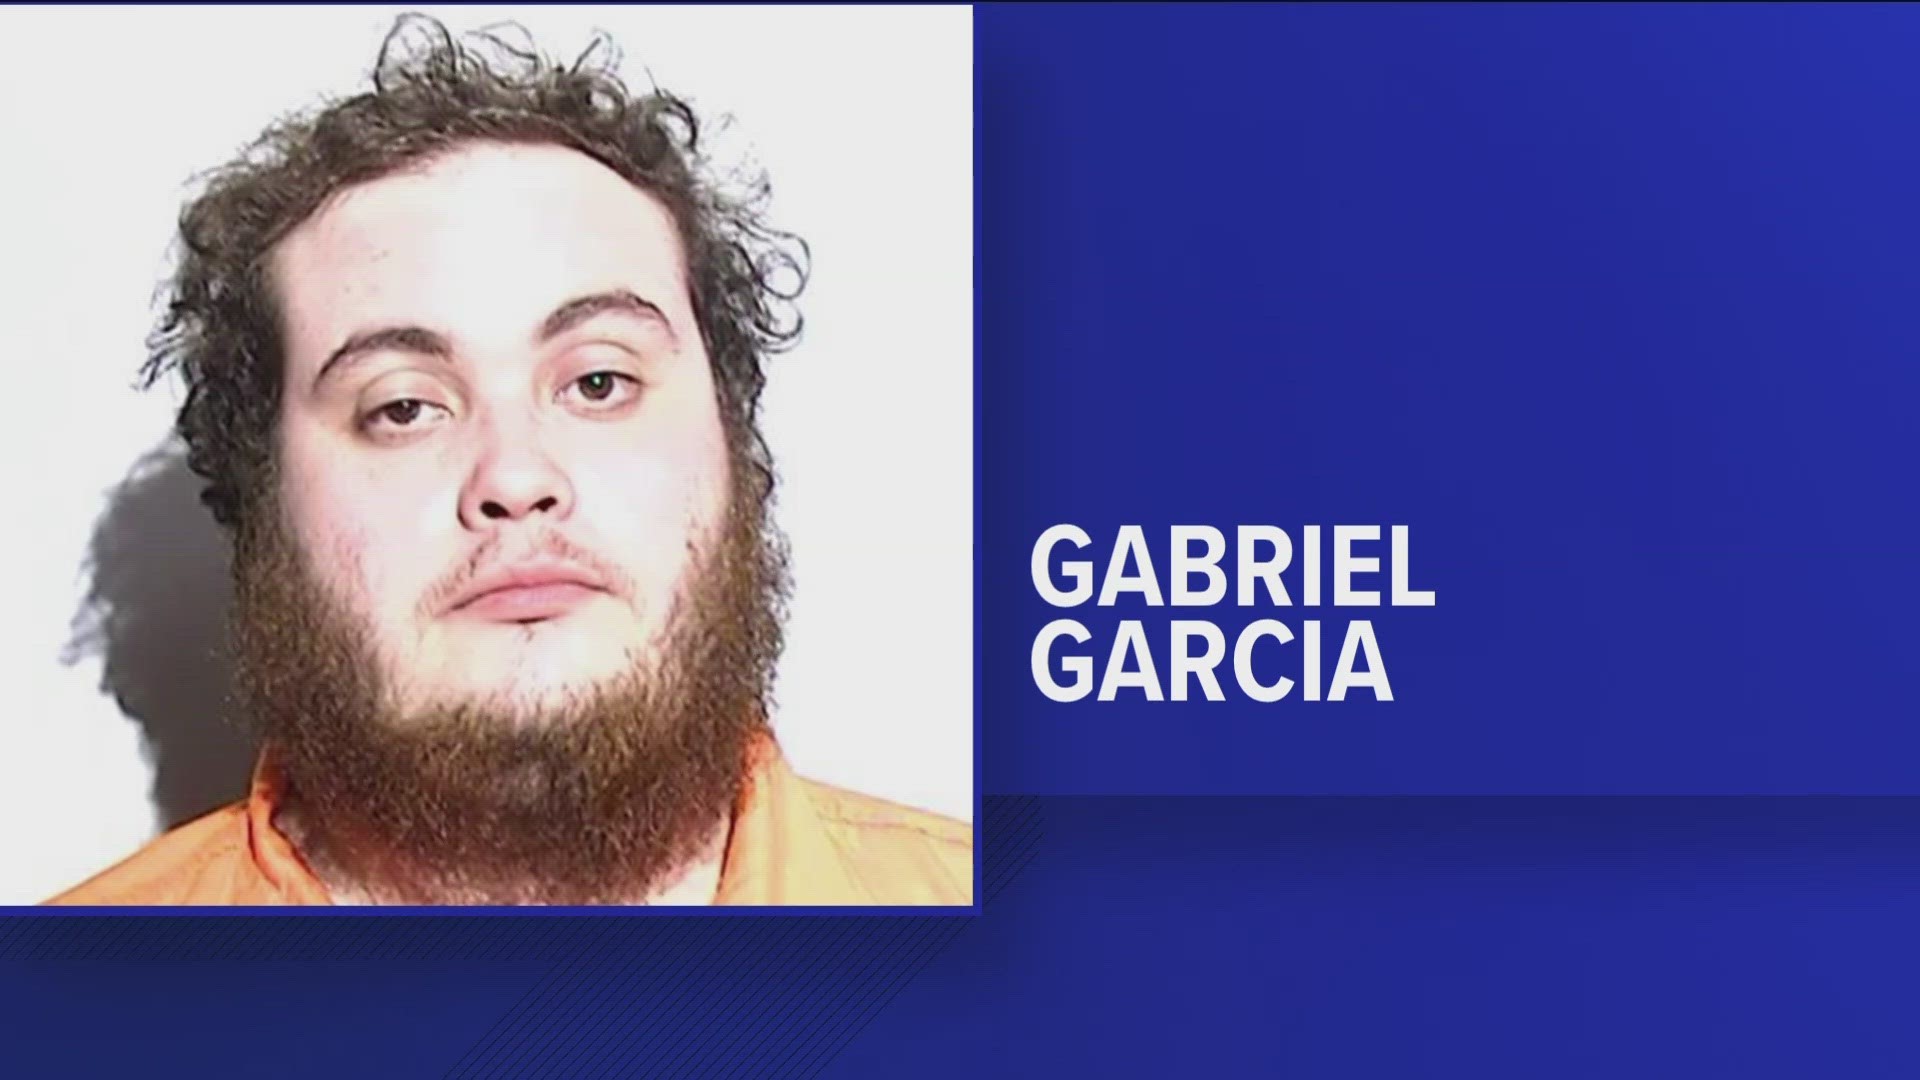 TPD are looking for Gabriel Garcia, 23, who is wanted in connection with the deaths of KeMarion Wilder and Kyshawn Pittman. He is the 11th person to be charged.